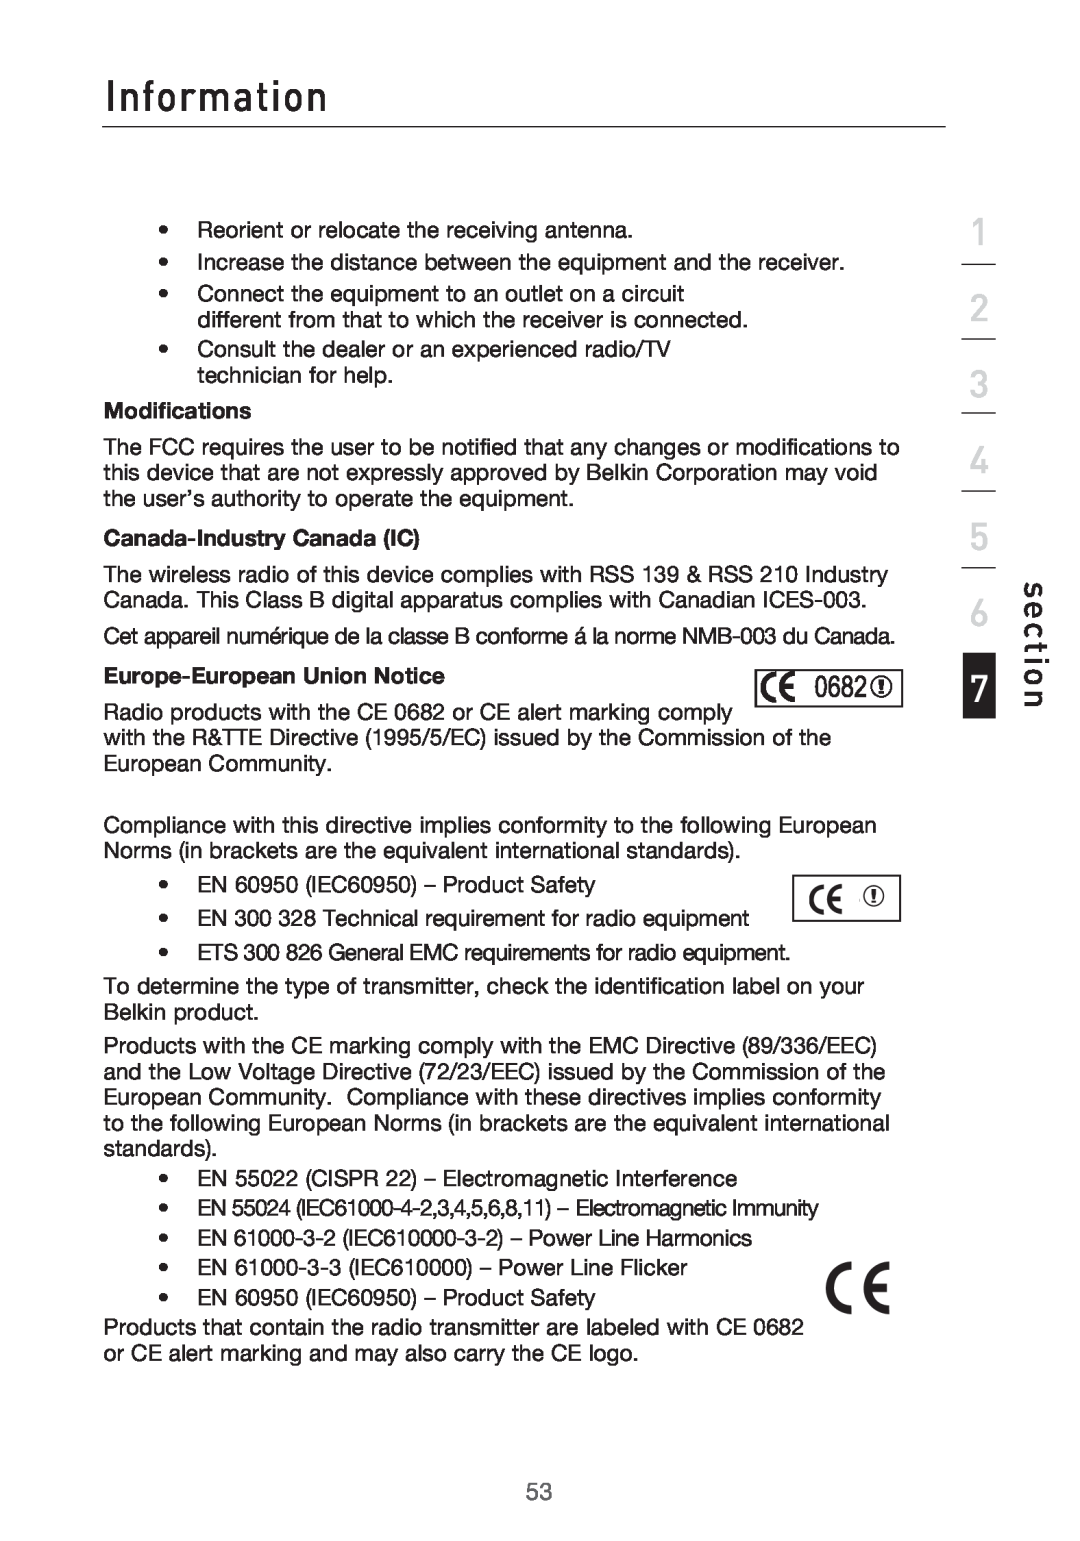 Belkin Range Extender/ Access Point Modifications, Canada-Industry Canada IC, Europe-European Union Notice, Information 